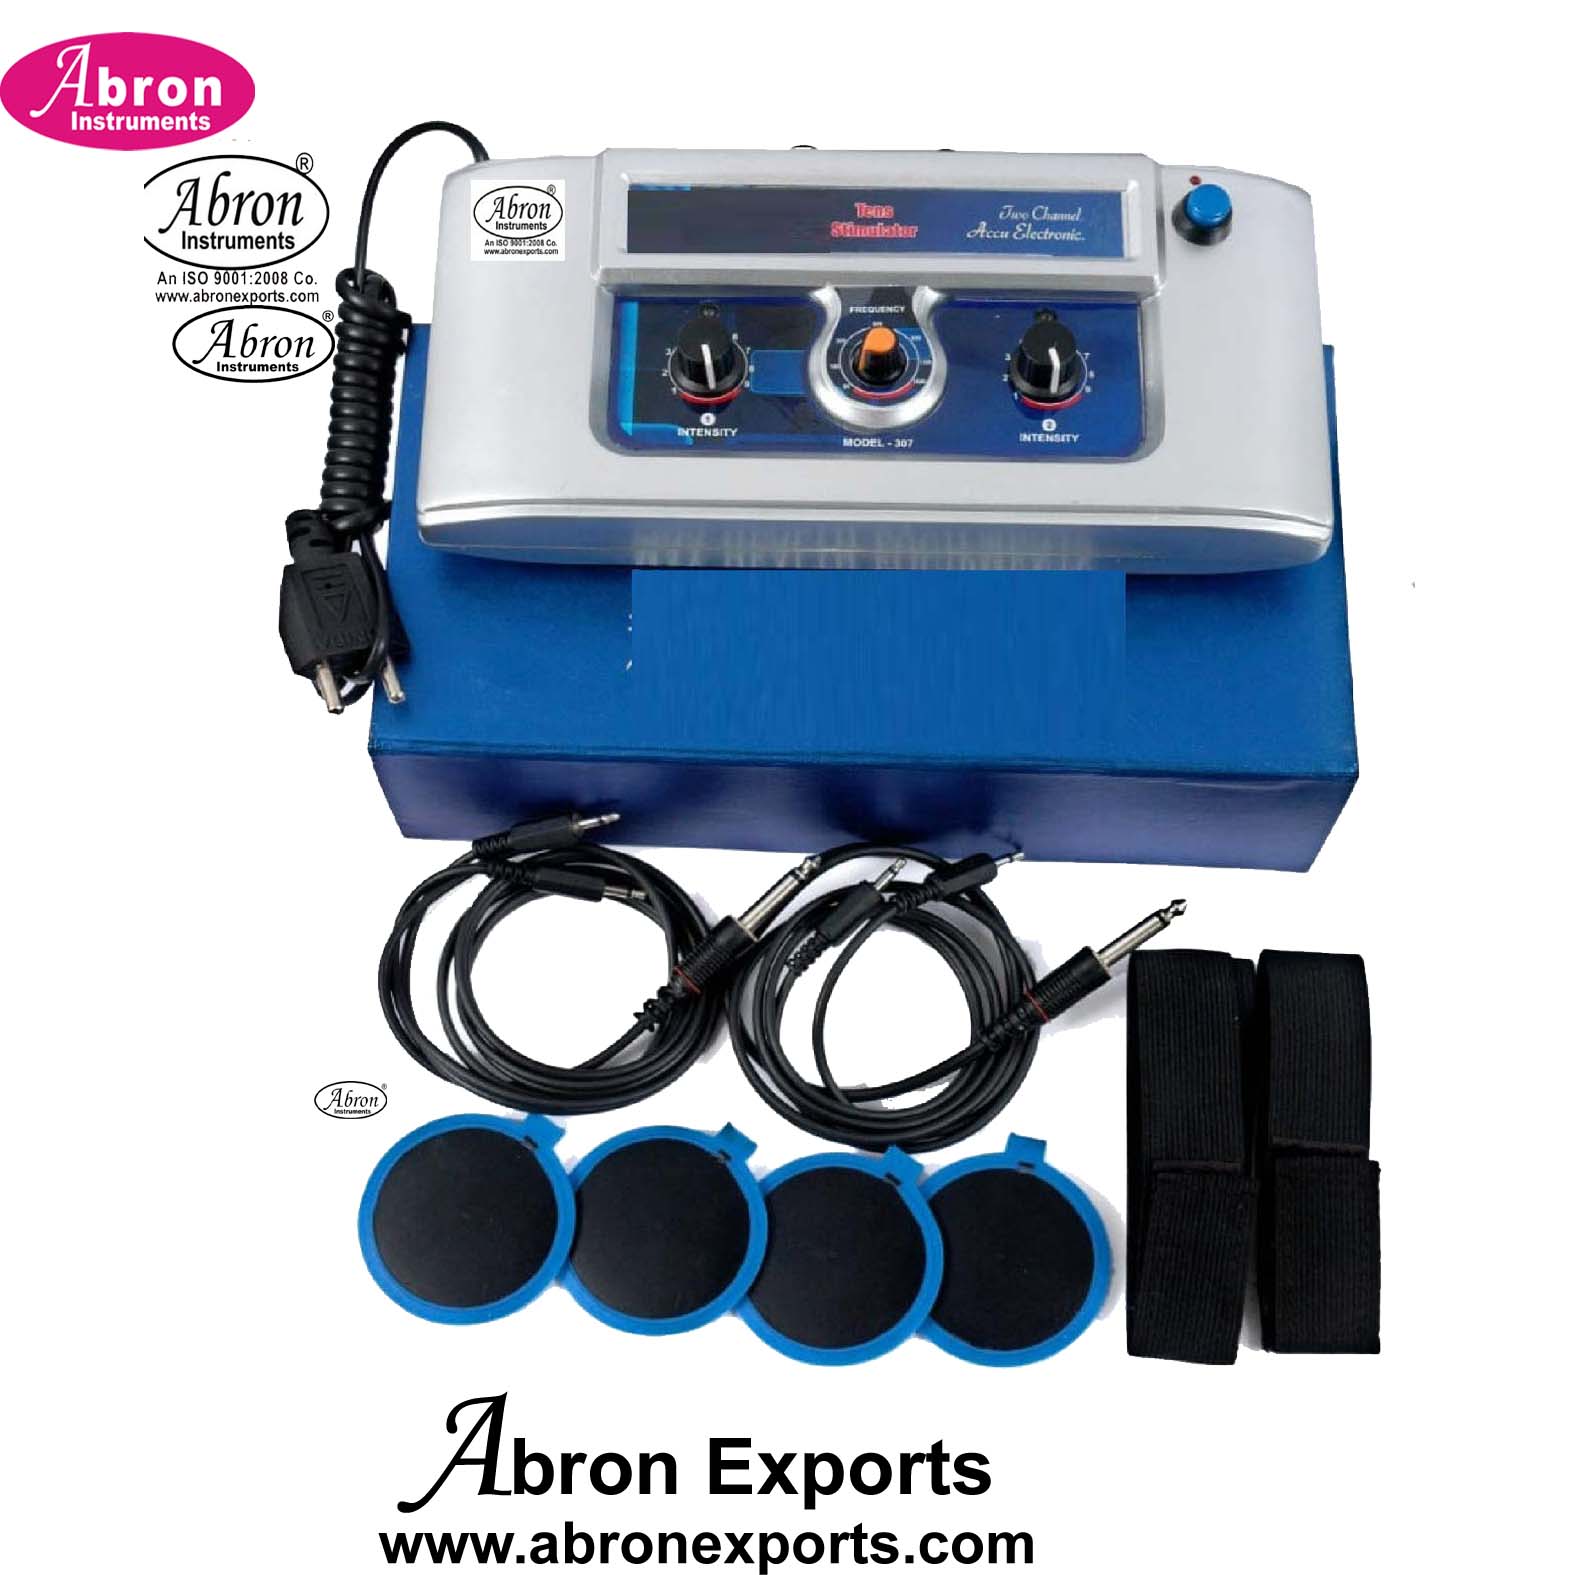 Physiotherapy Stimulator Transcutaneous Electrical Stimulator Medical use Abron ABM-1161CH 